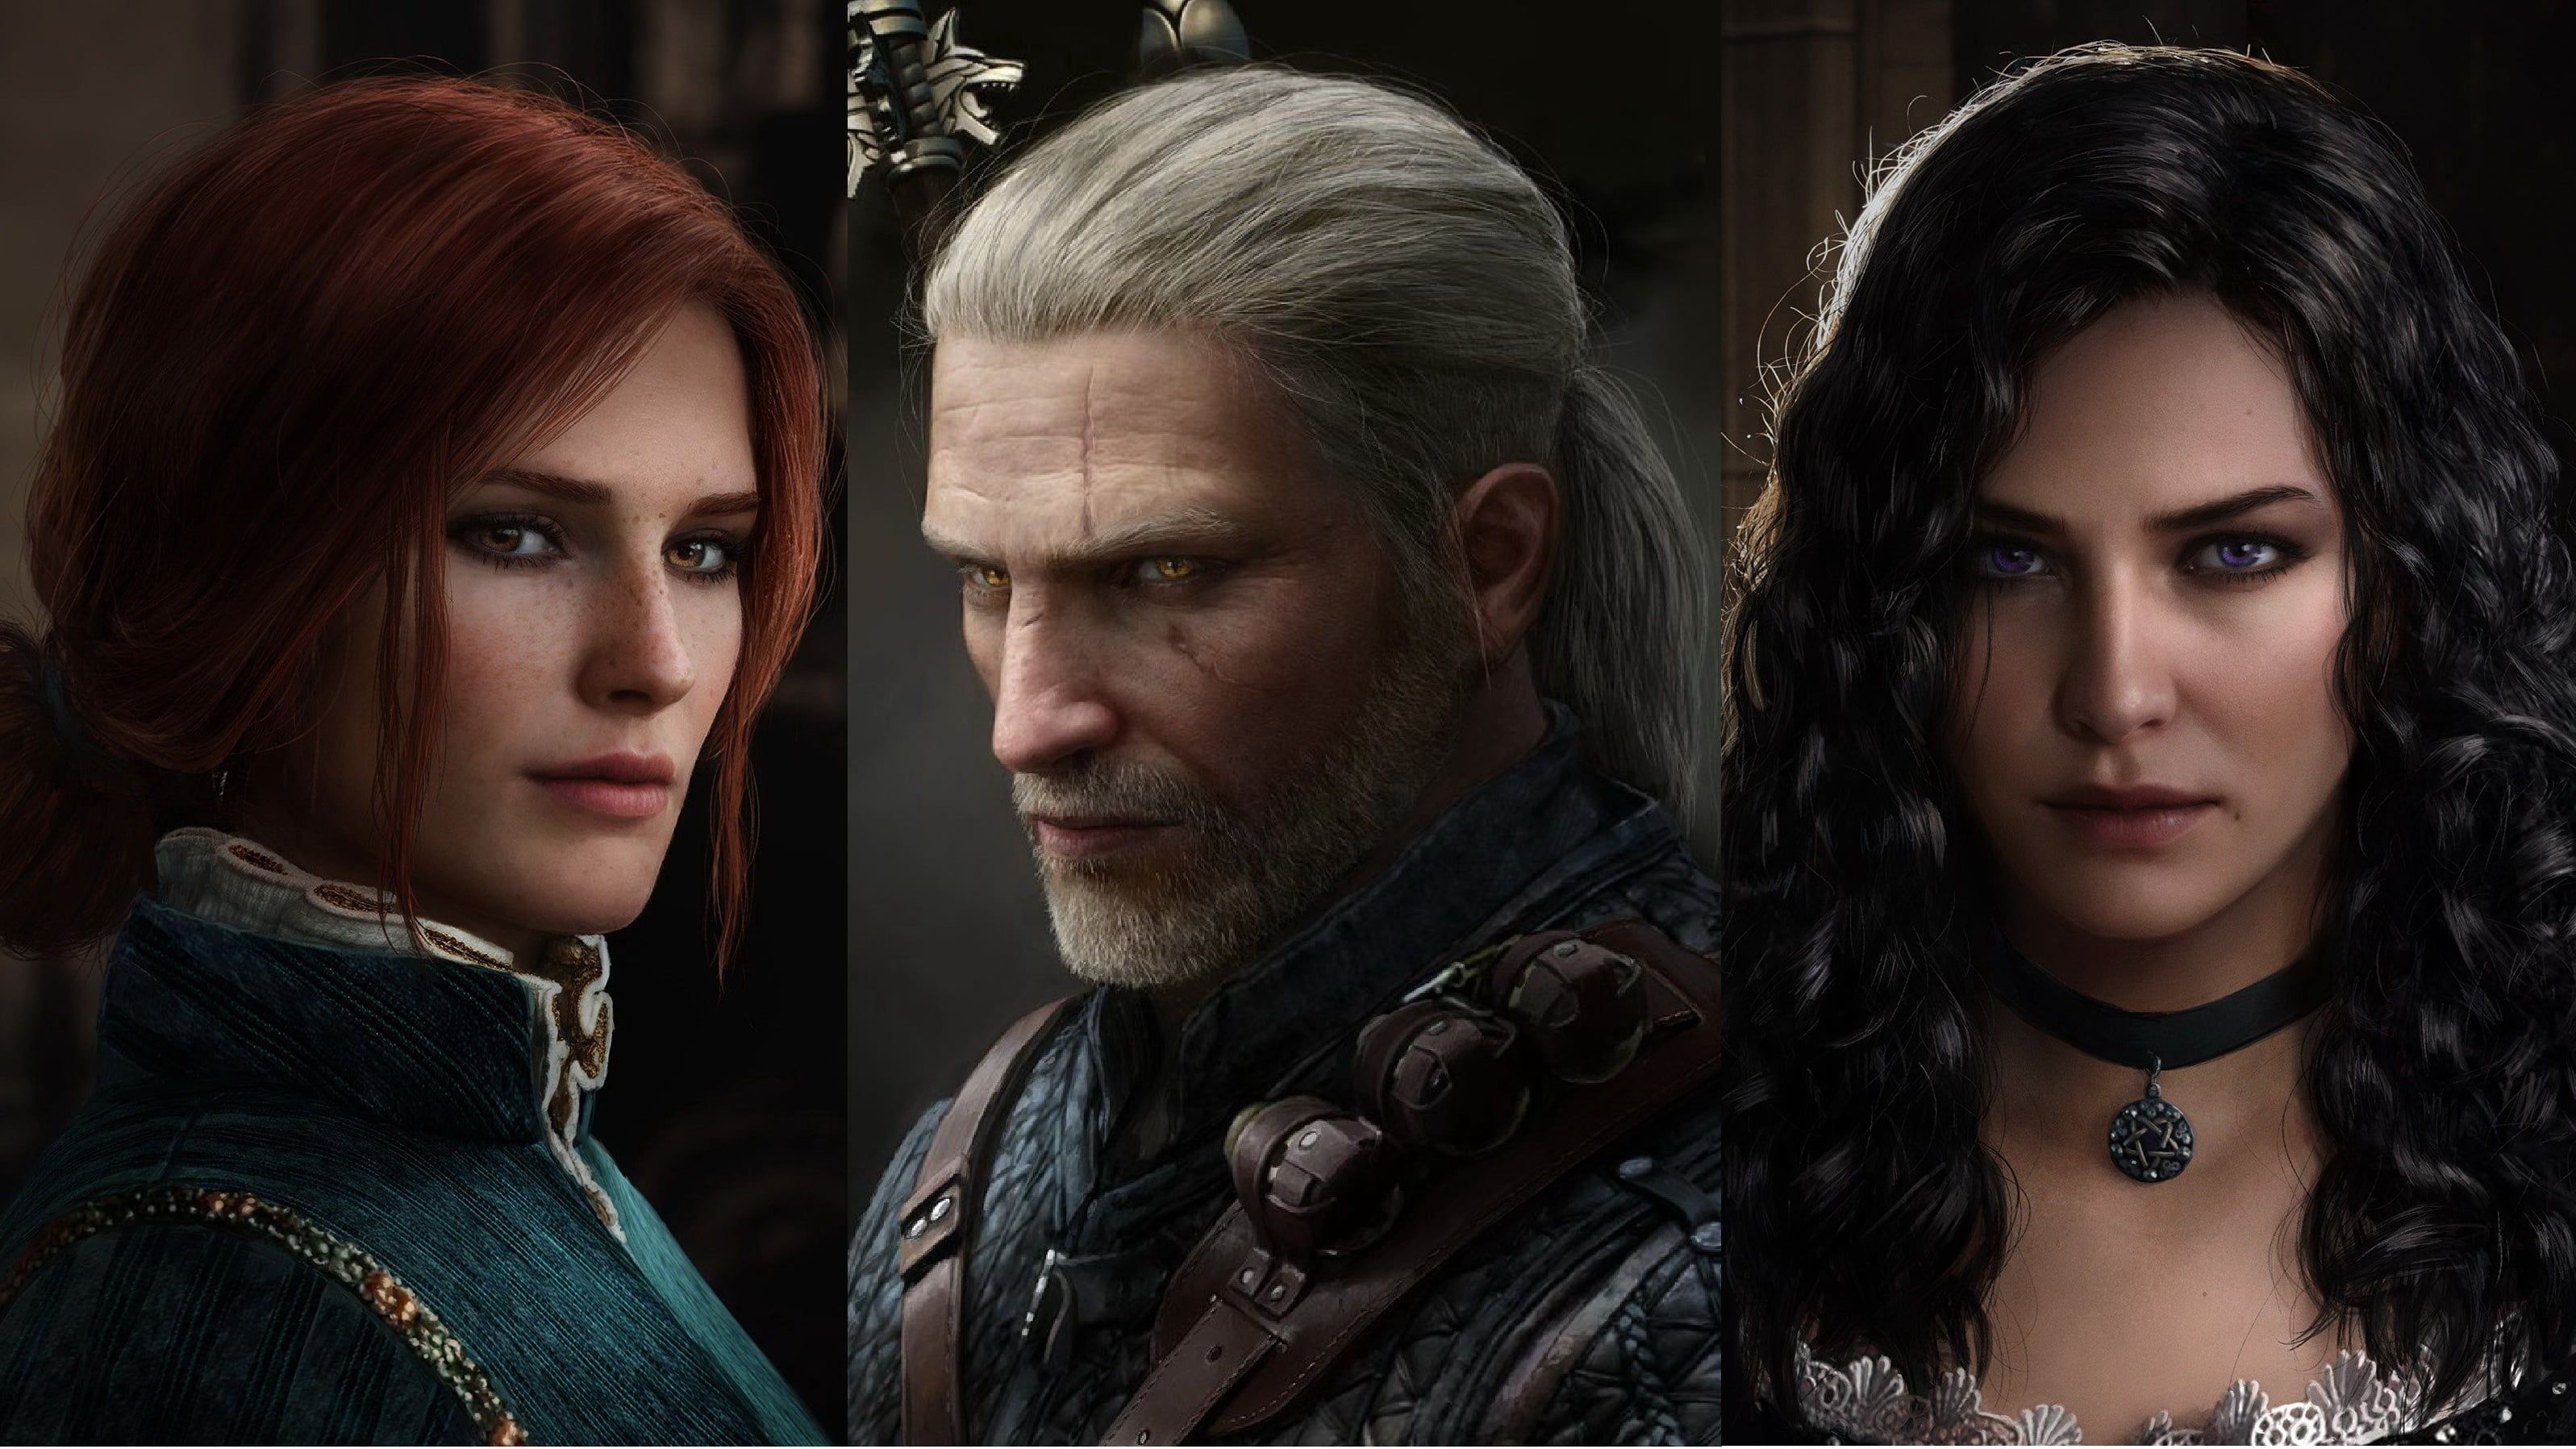 the witcher 3 characters